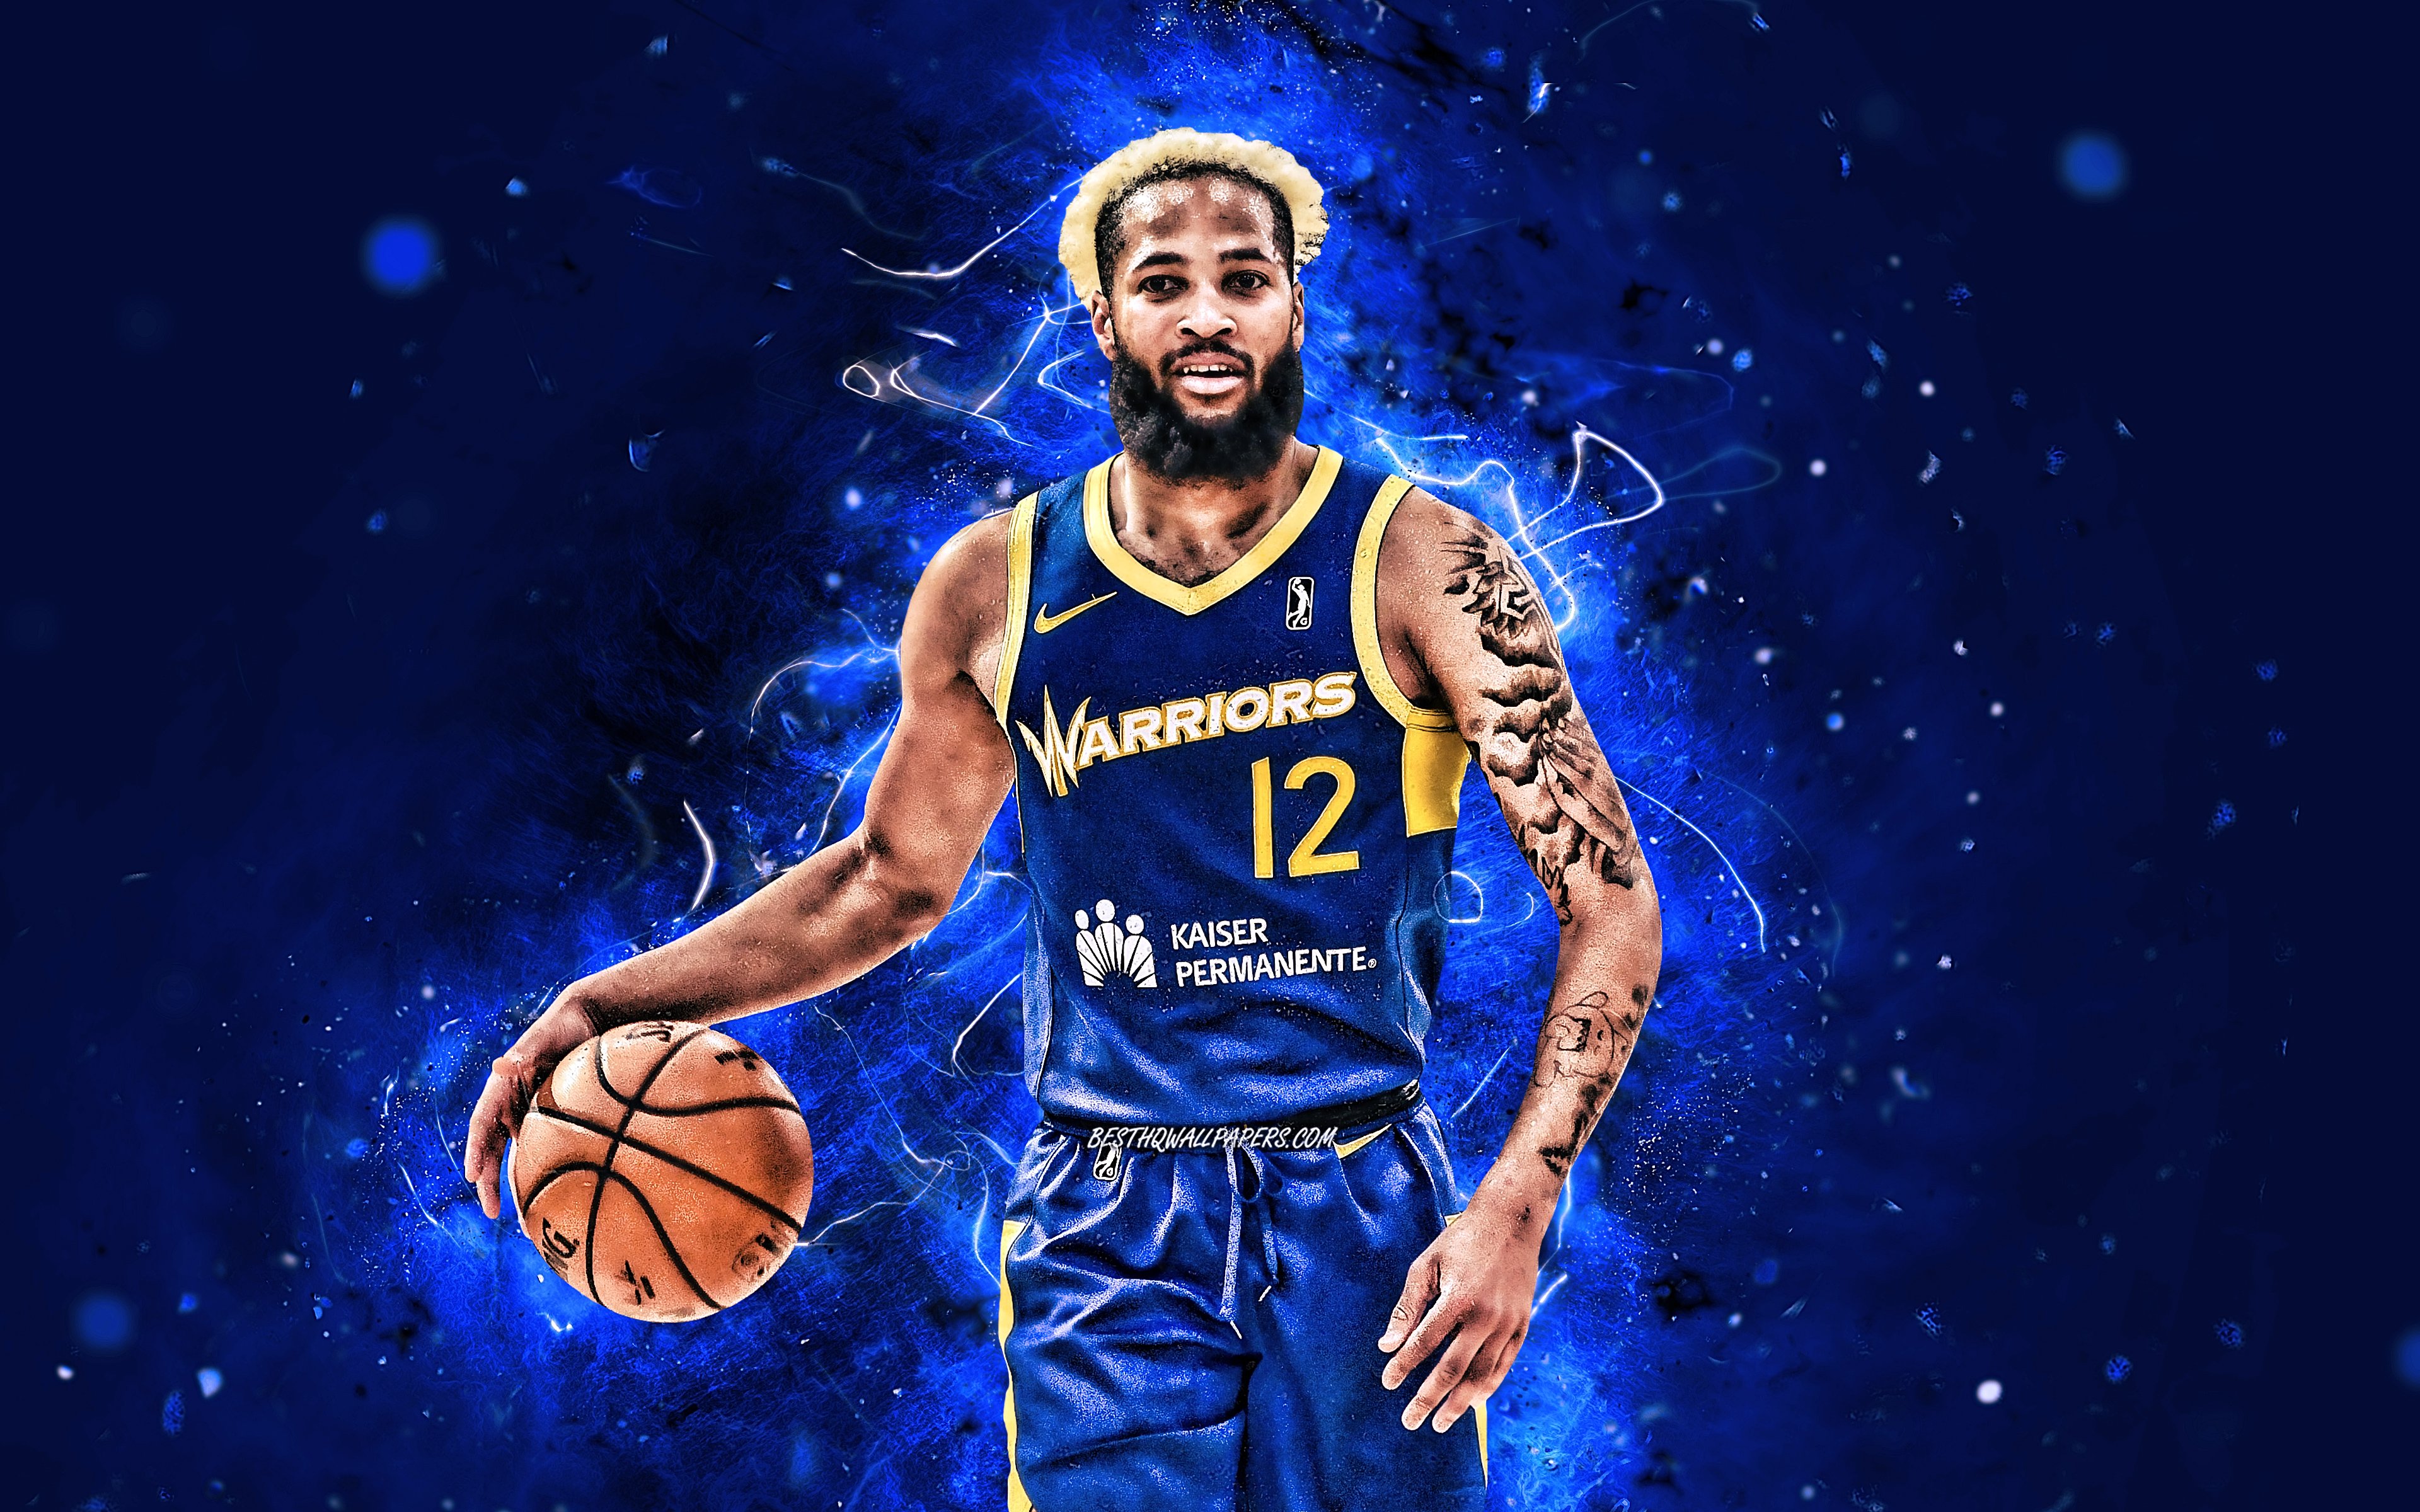 Nba Wallpapers Full HD / 4K for Android - Download | Cafe Bazaar